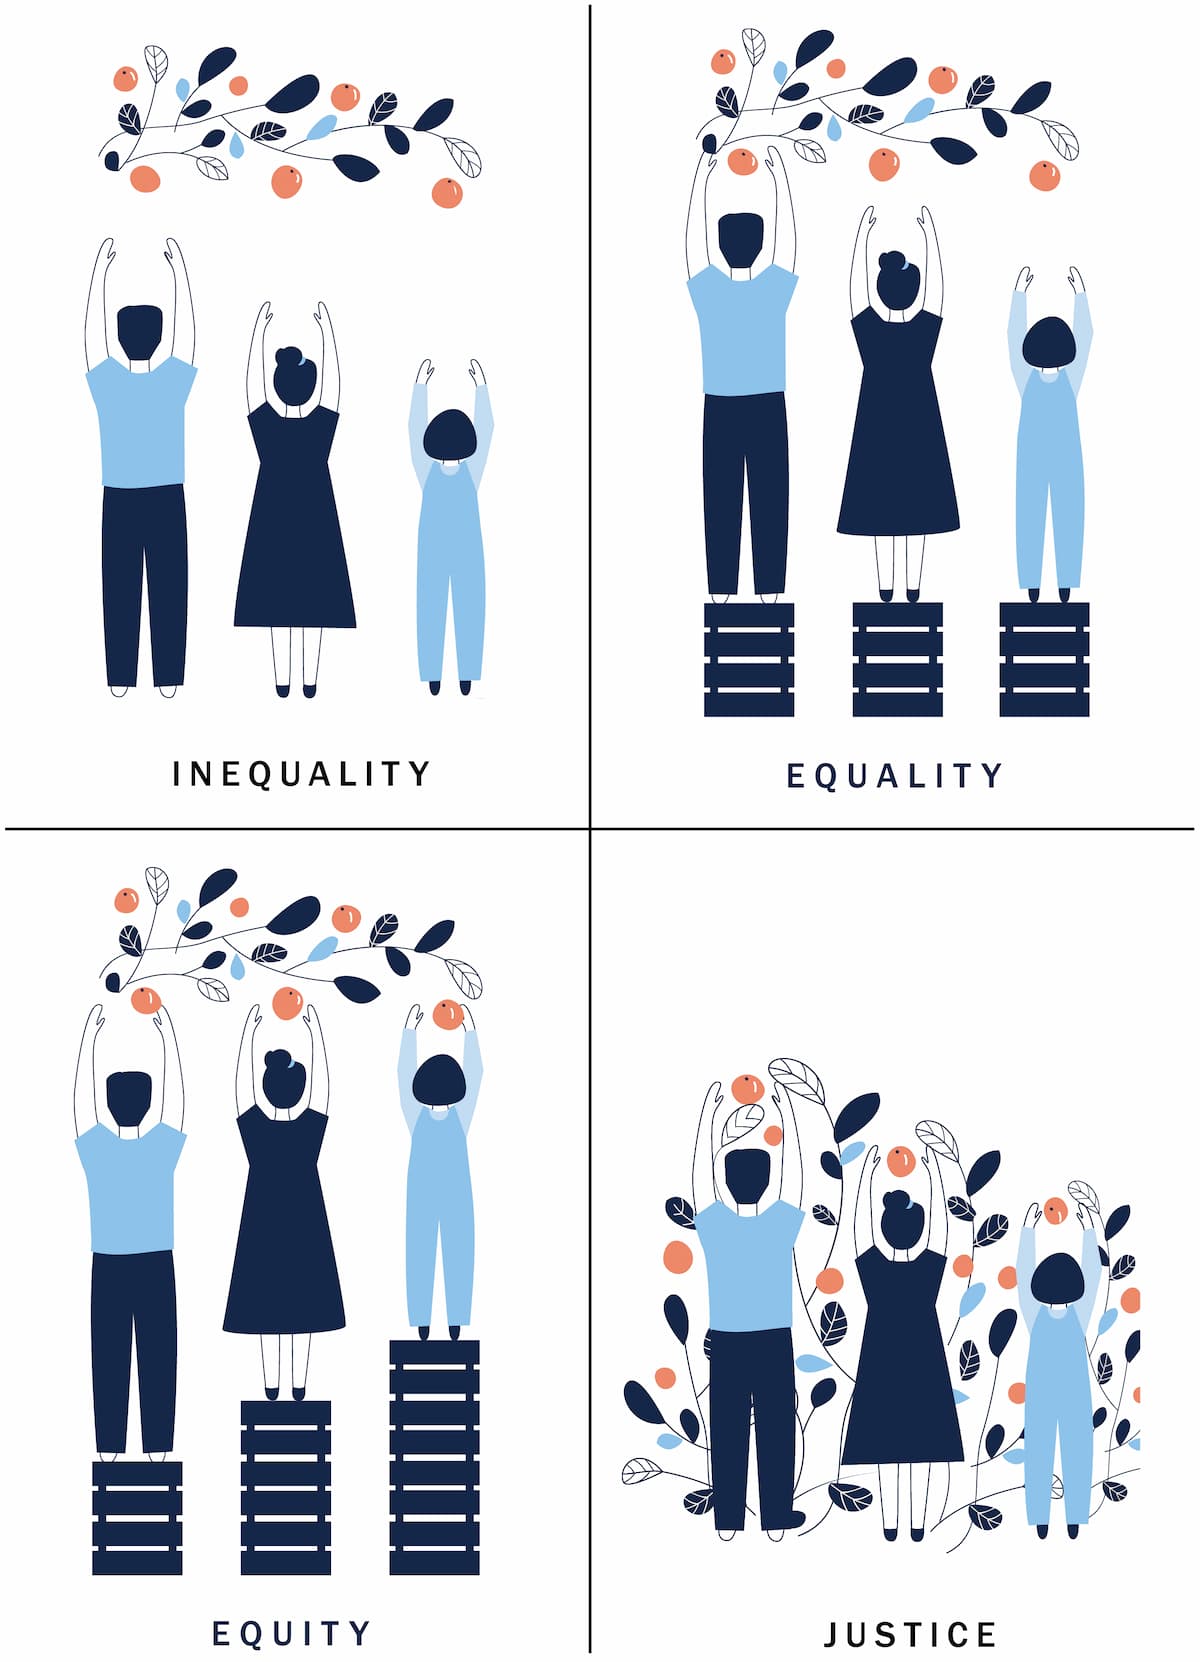 4 images of people reaching for fruit on trees as a comparison of inequality, equality, equity, and justice